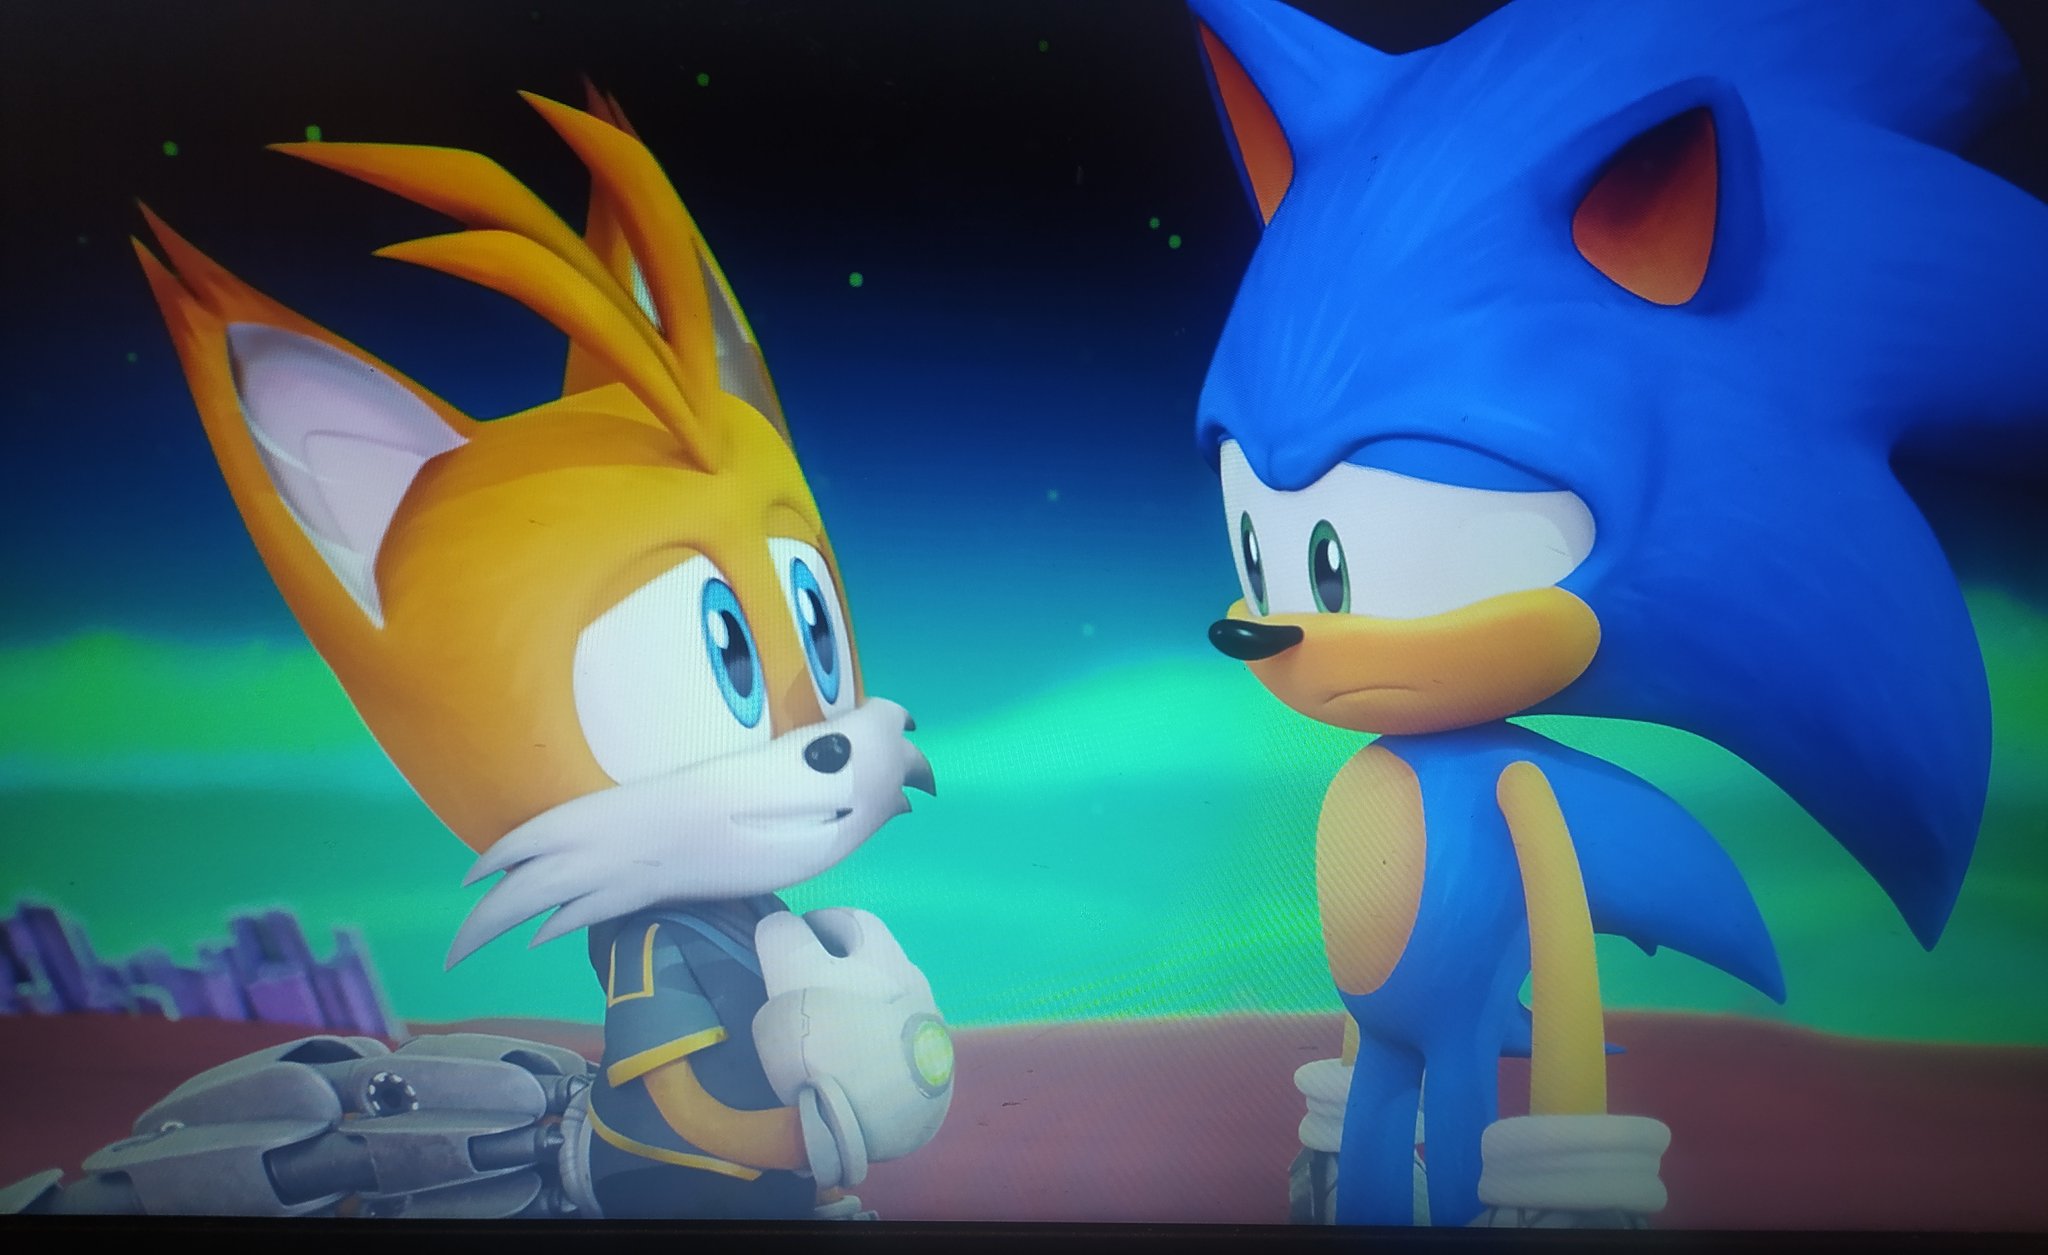 SunnyElSolSol on X: Oh believe me this isn't even the worst part. They  didn't even modified the game at all. Sonic 1 still doesn't let you play as  Sonic and Tails combined